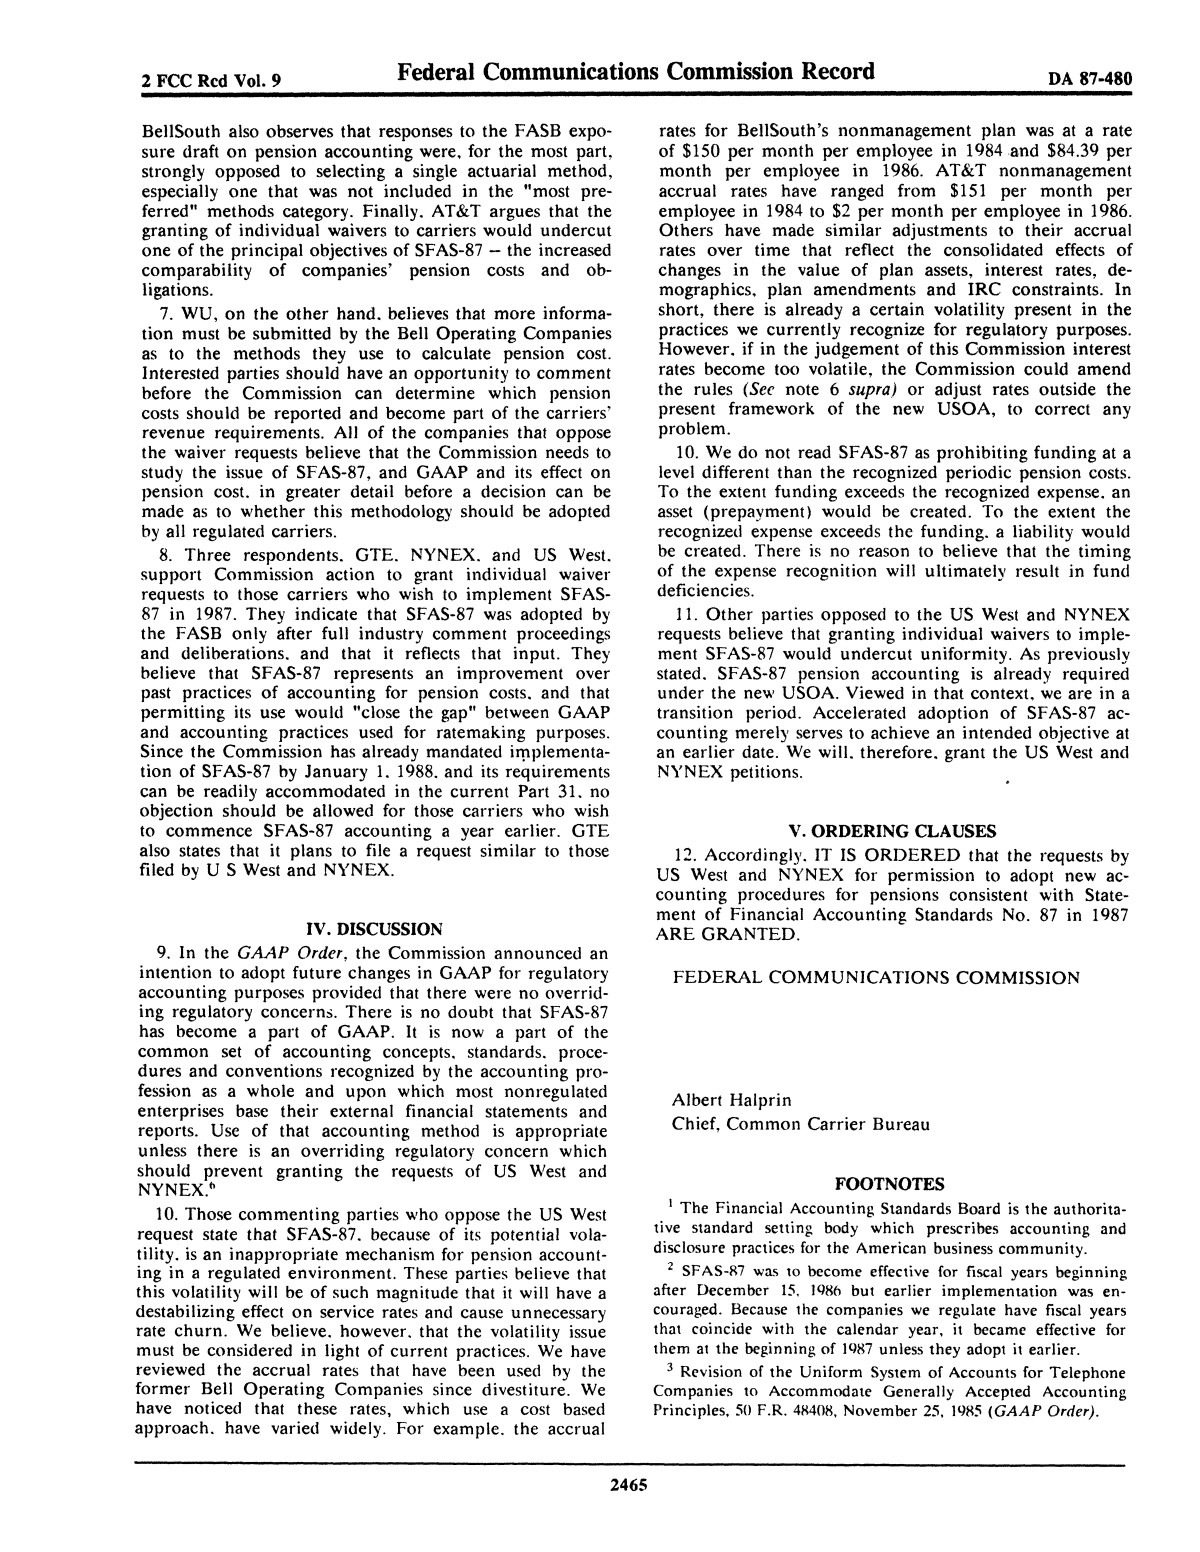 FCC Record, Volume 2, No. 9, Pages 2437 to 2750, April 27 - May 8, 1987
                                                
                                                    2465
                                                